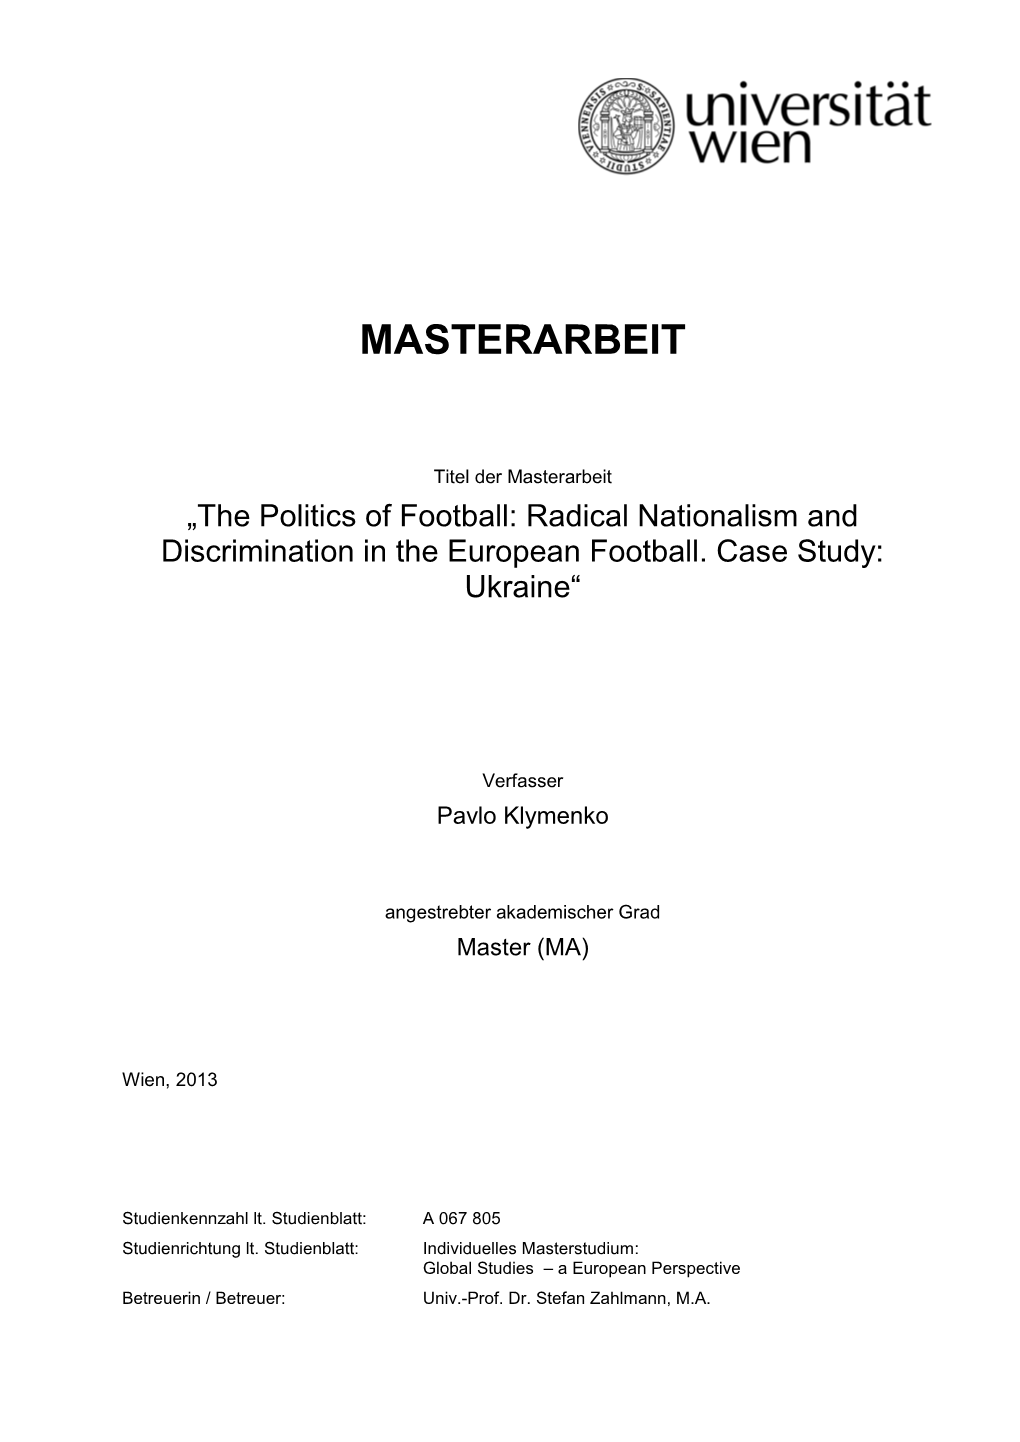 The Politics of Football: Radical Nationalism and Discrimination in the European Football